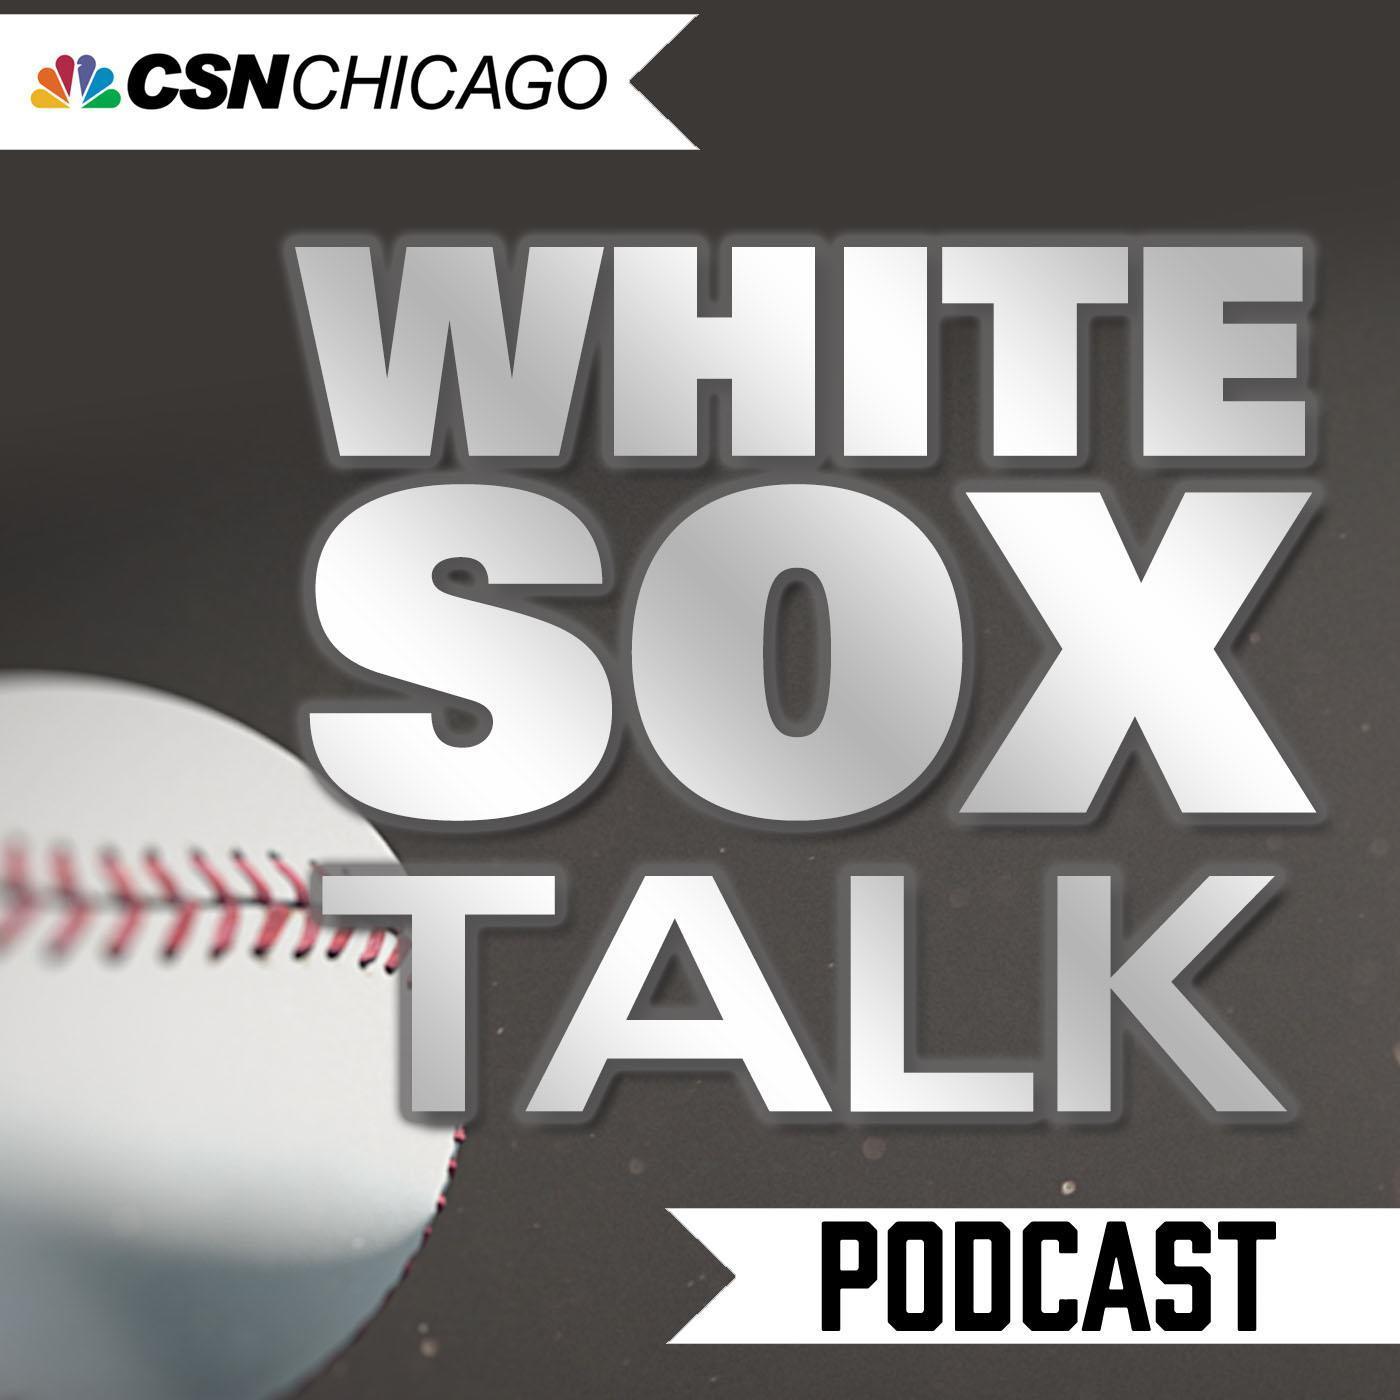 Ep. 4: Reaction to the national media blunders that failed to recognize the White Sox as the 2005 World Series winners